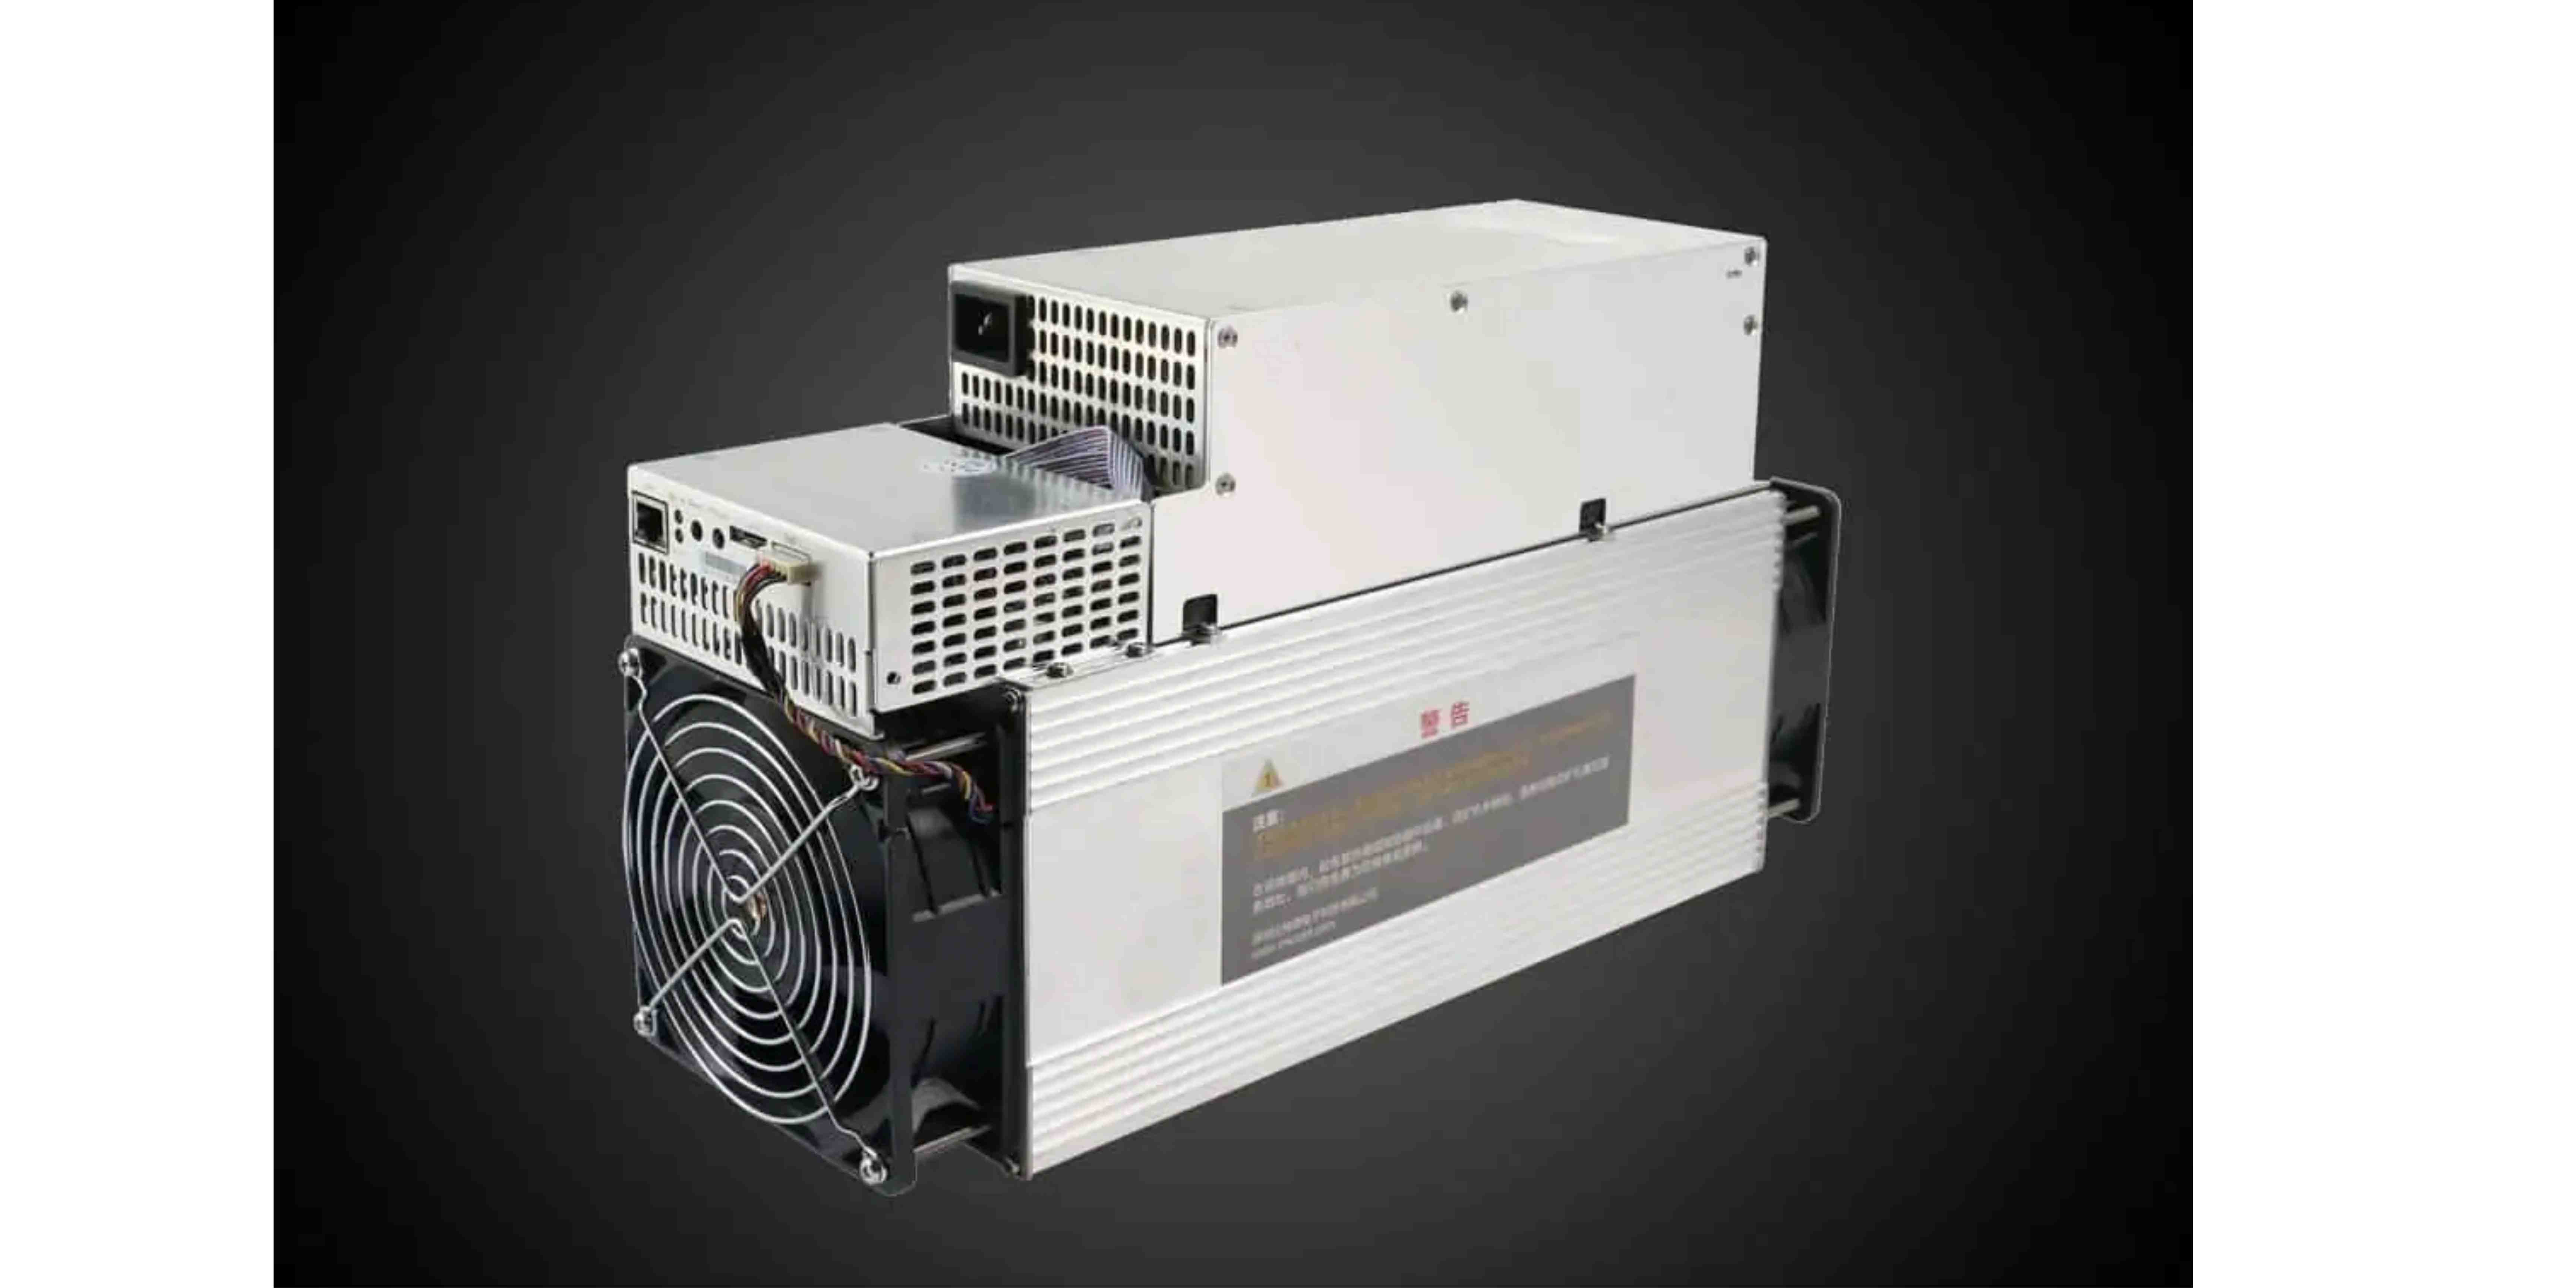 MicroBT Whatsminer M30S Mining Hashrate And Specifications